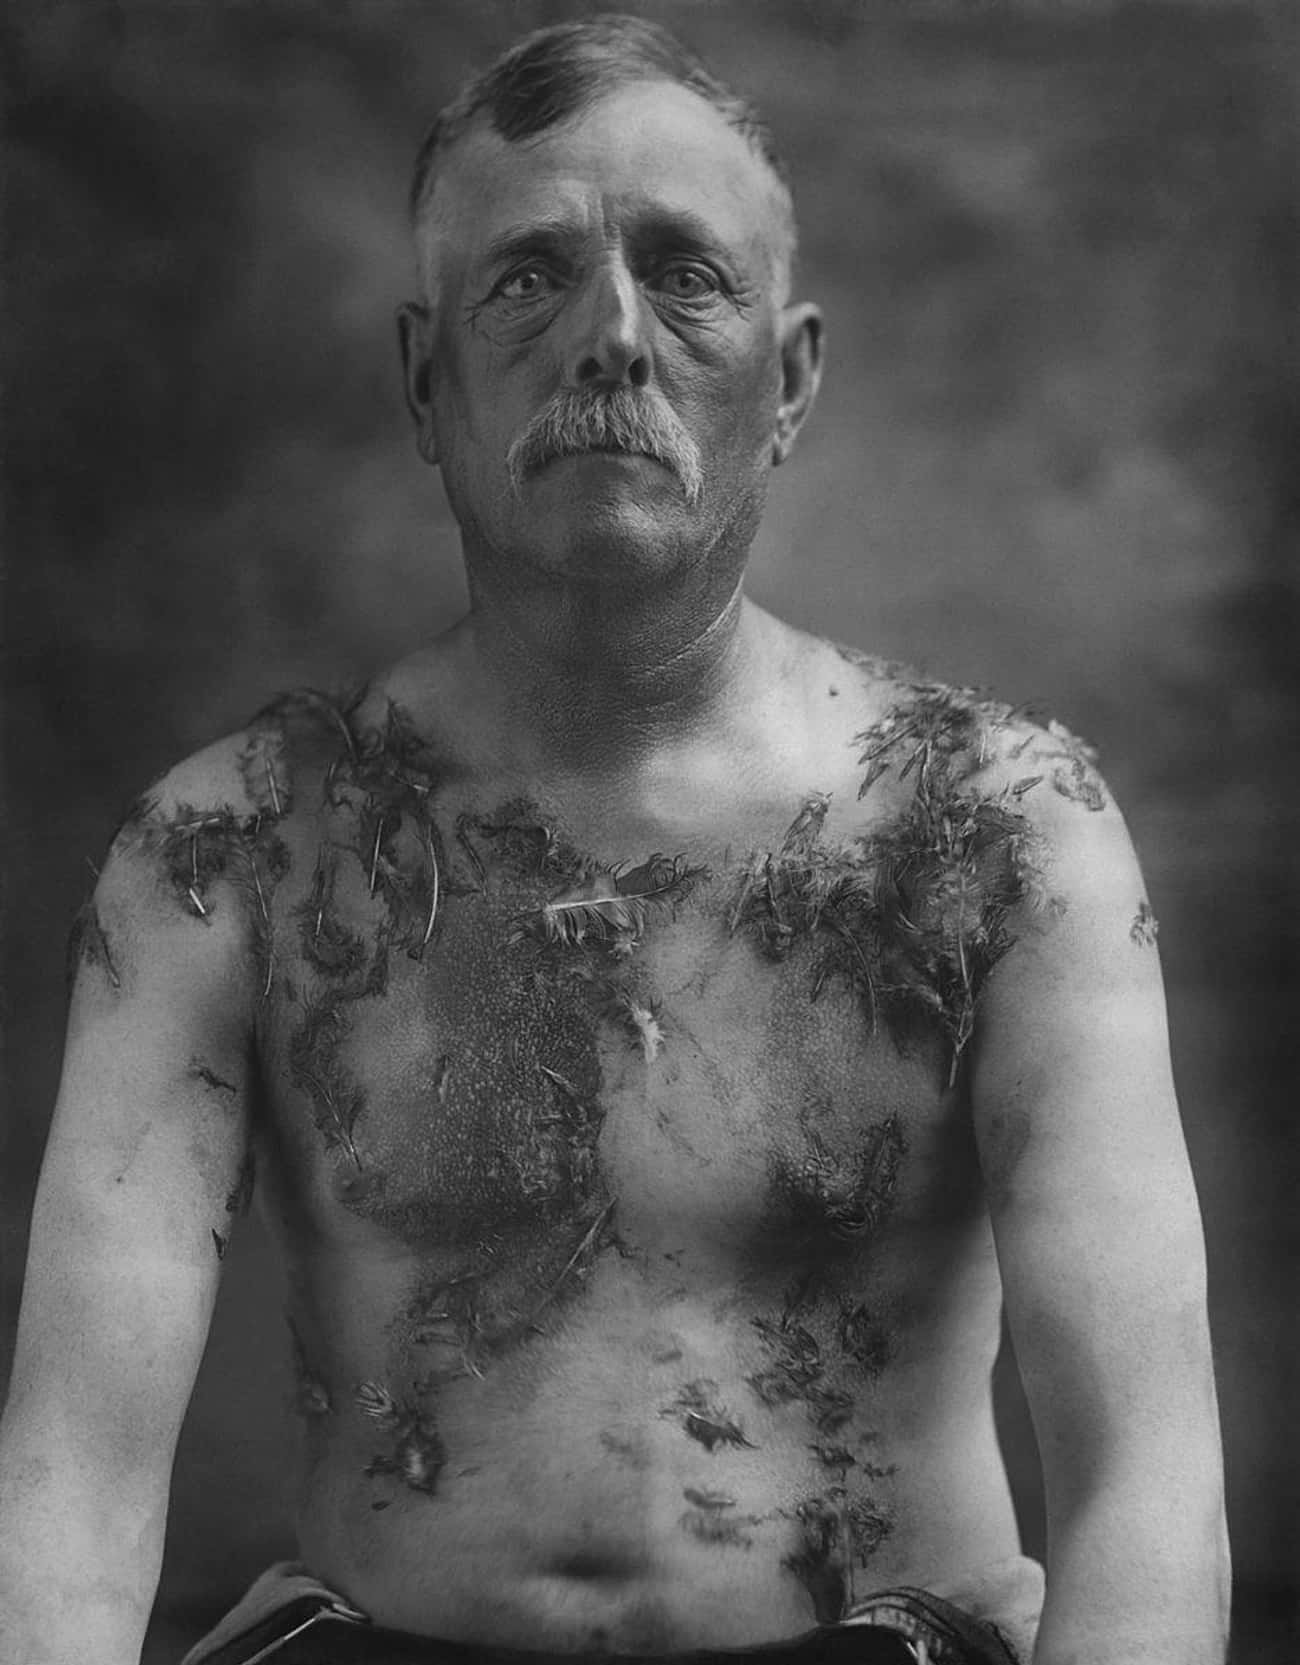 German-American Farmer After Being Tarred And Feathered Amid Anti-German Sentiment In The US During WWI - 1918